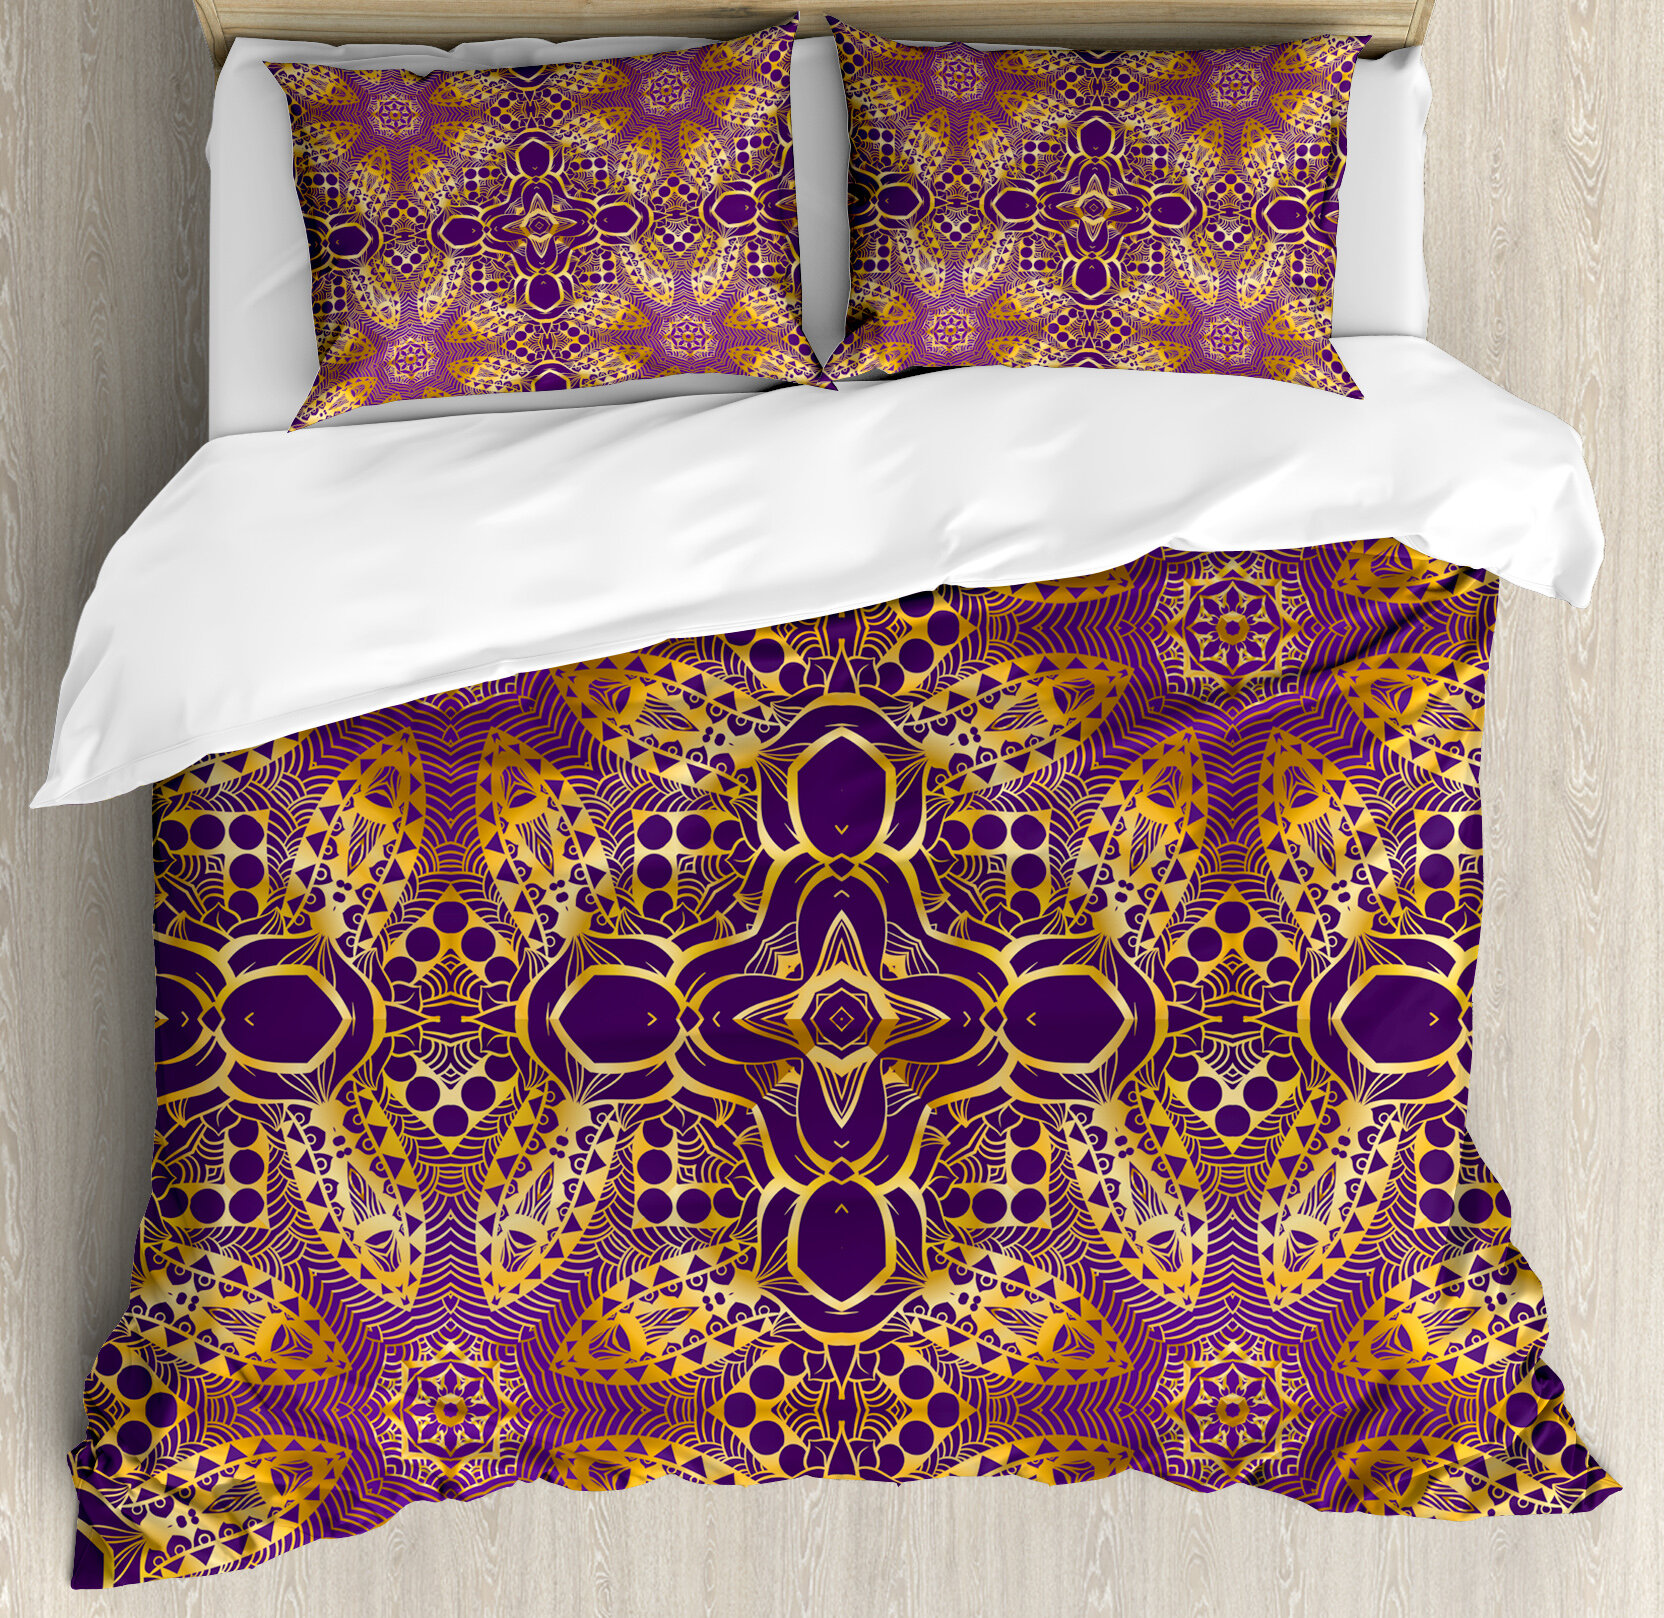 Moroccan Ethnic Indian Asian Bohemian Print Duvet Cover Quilt